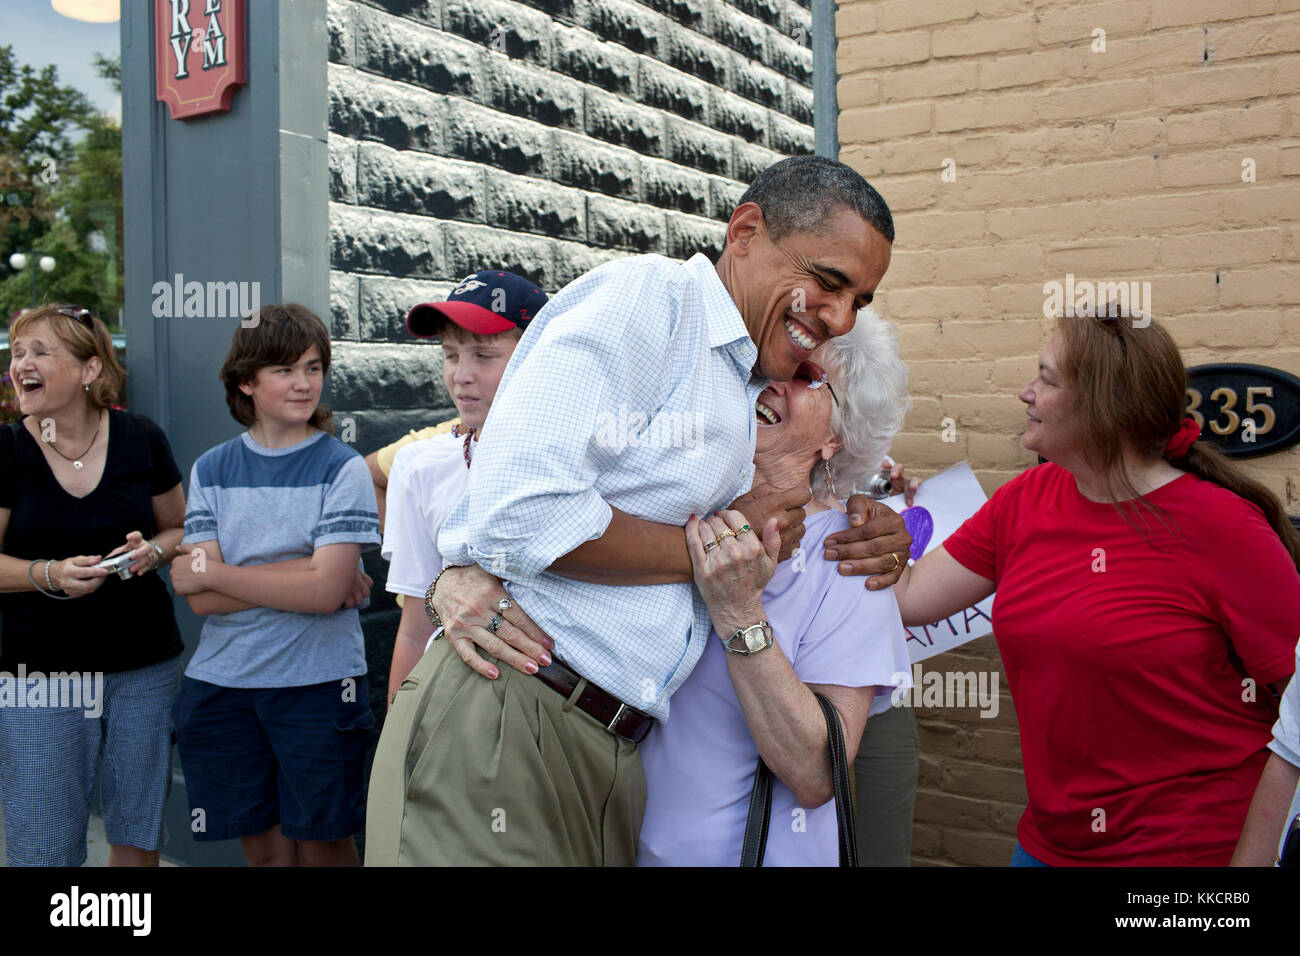 President Barack Obama greets people outside the Old Market Deli in Cannon Falls, Minn. Aug. 15, 2011. The President stopped to have lunch with five post-9/11 veterans from Minnesota during a three-day bus tour in the Midwest. Stock Photo